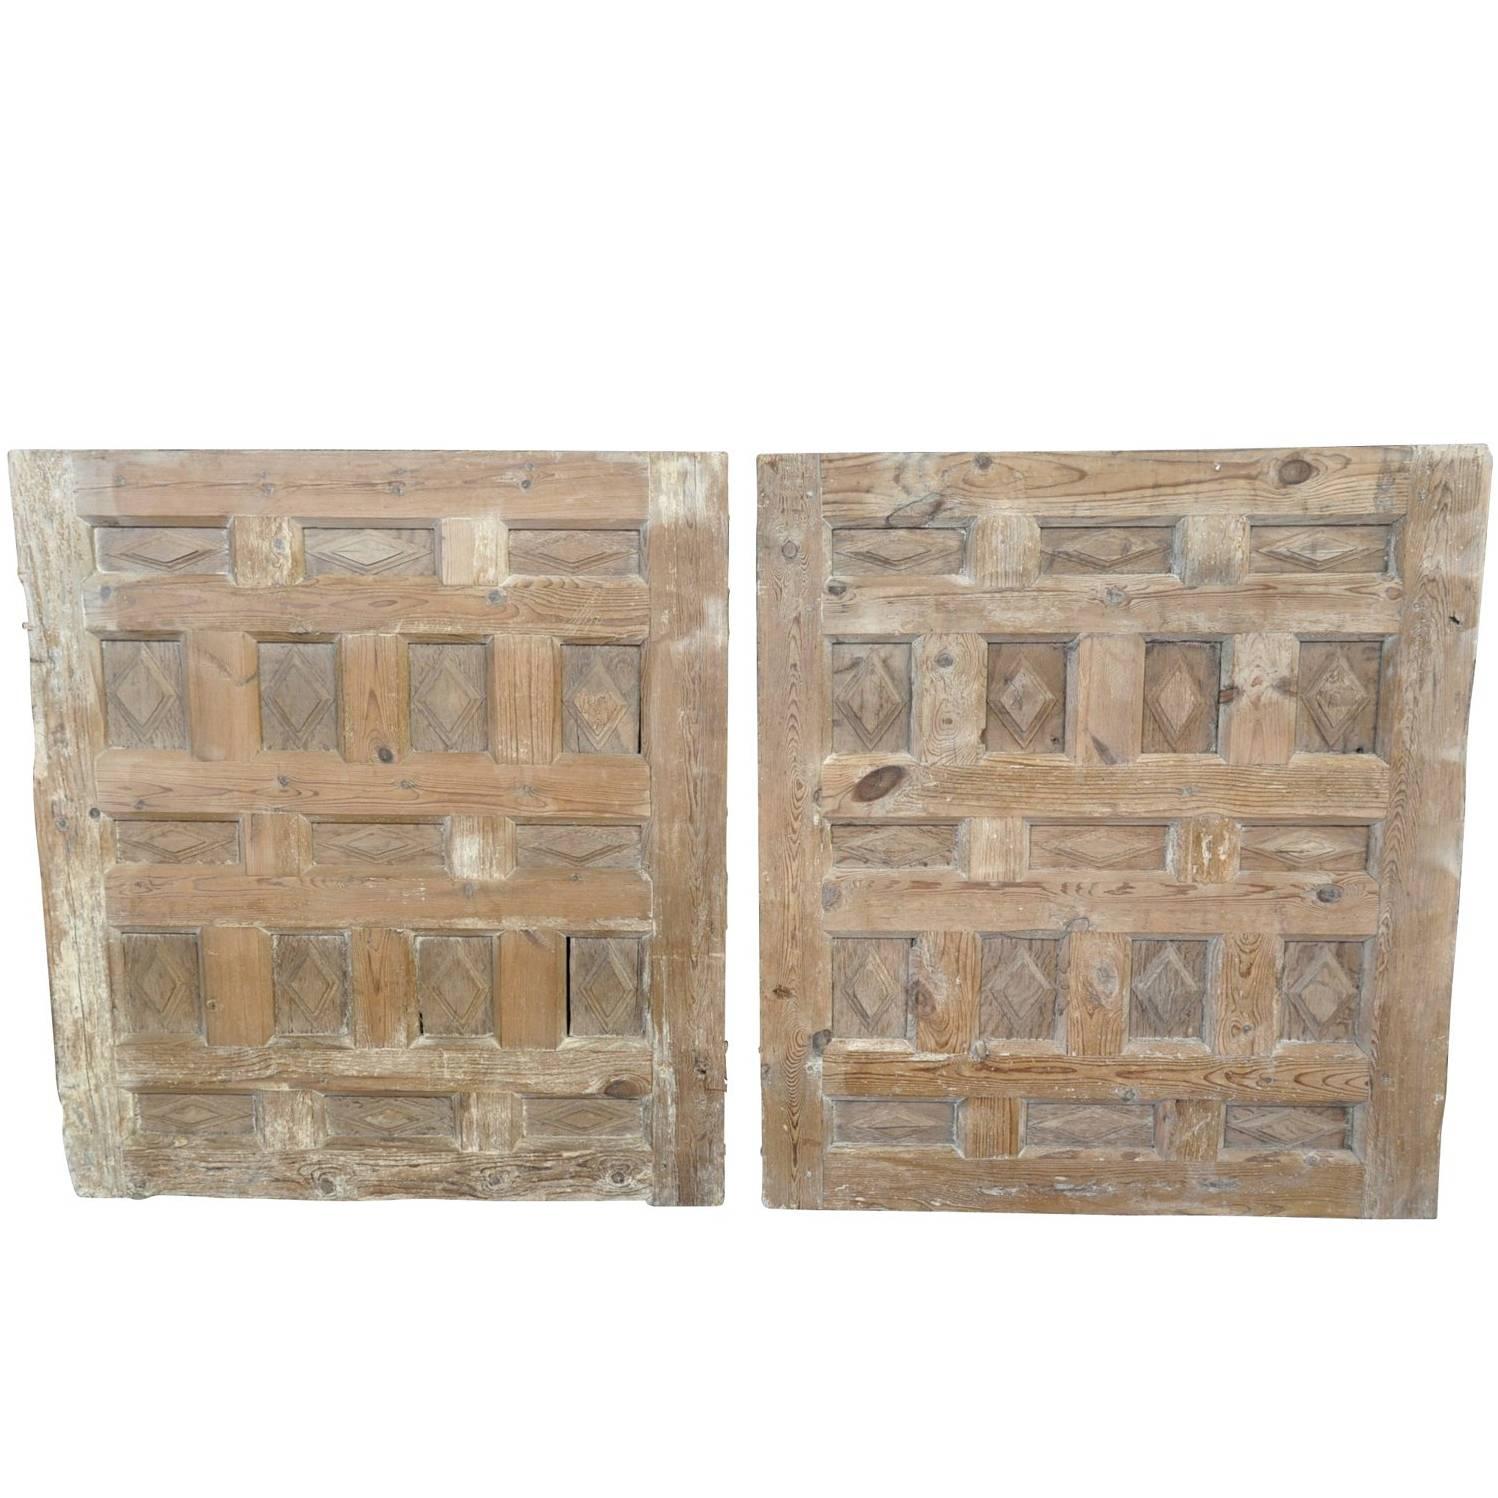 Pair of 17th Century Spanish Carved Panels